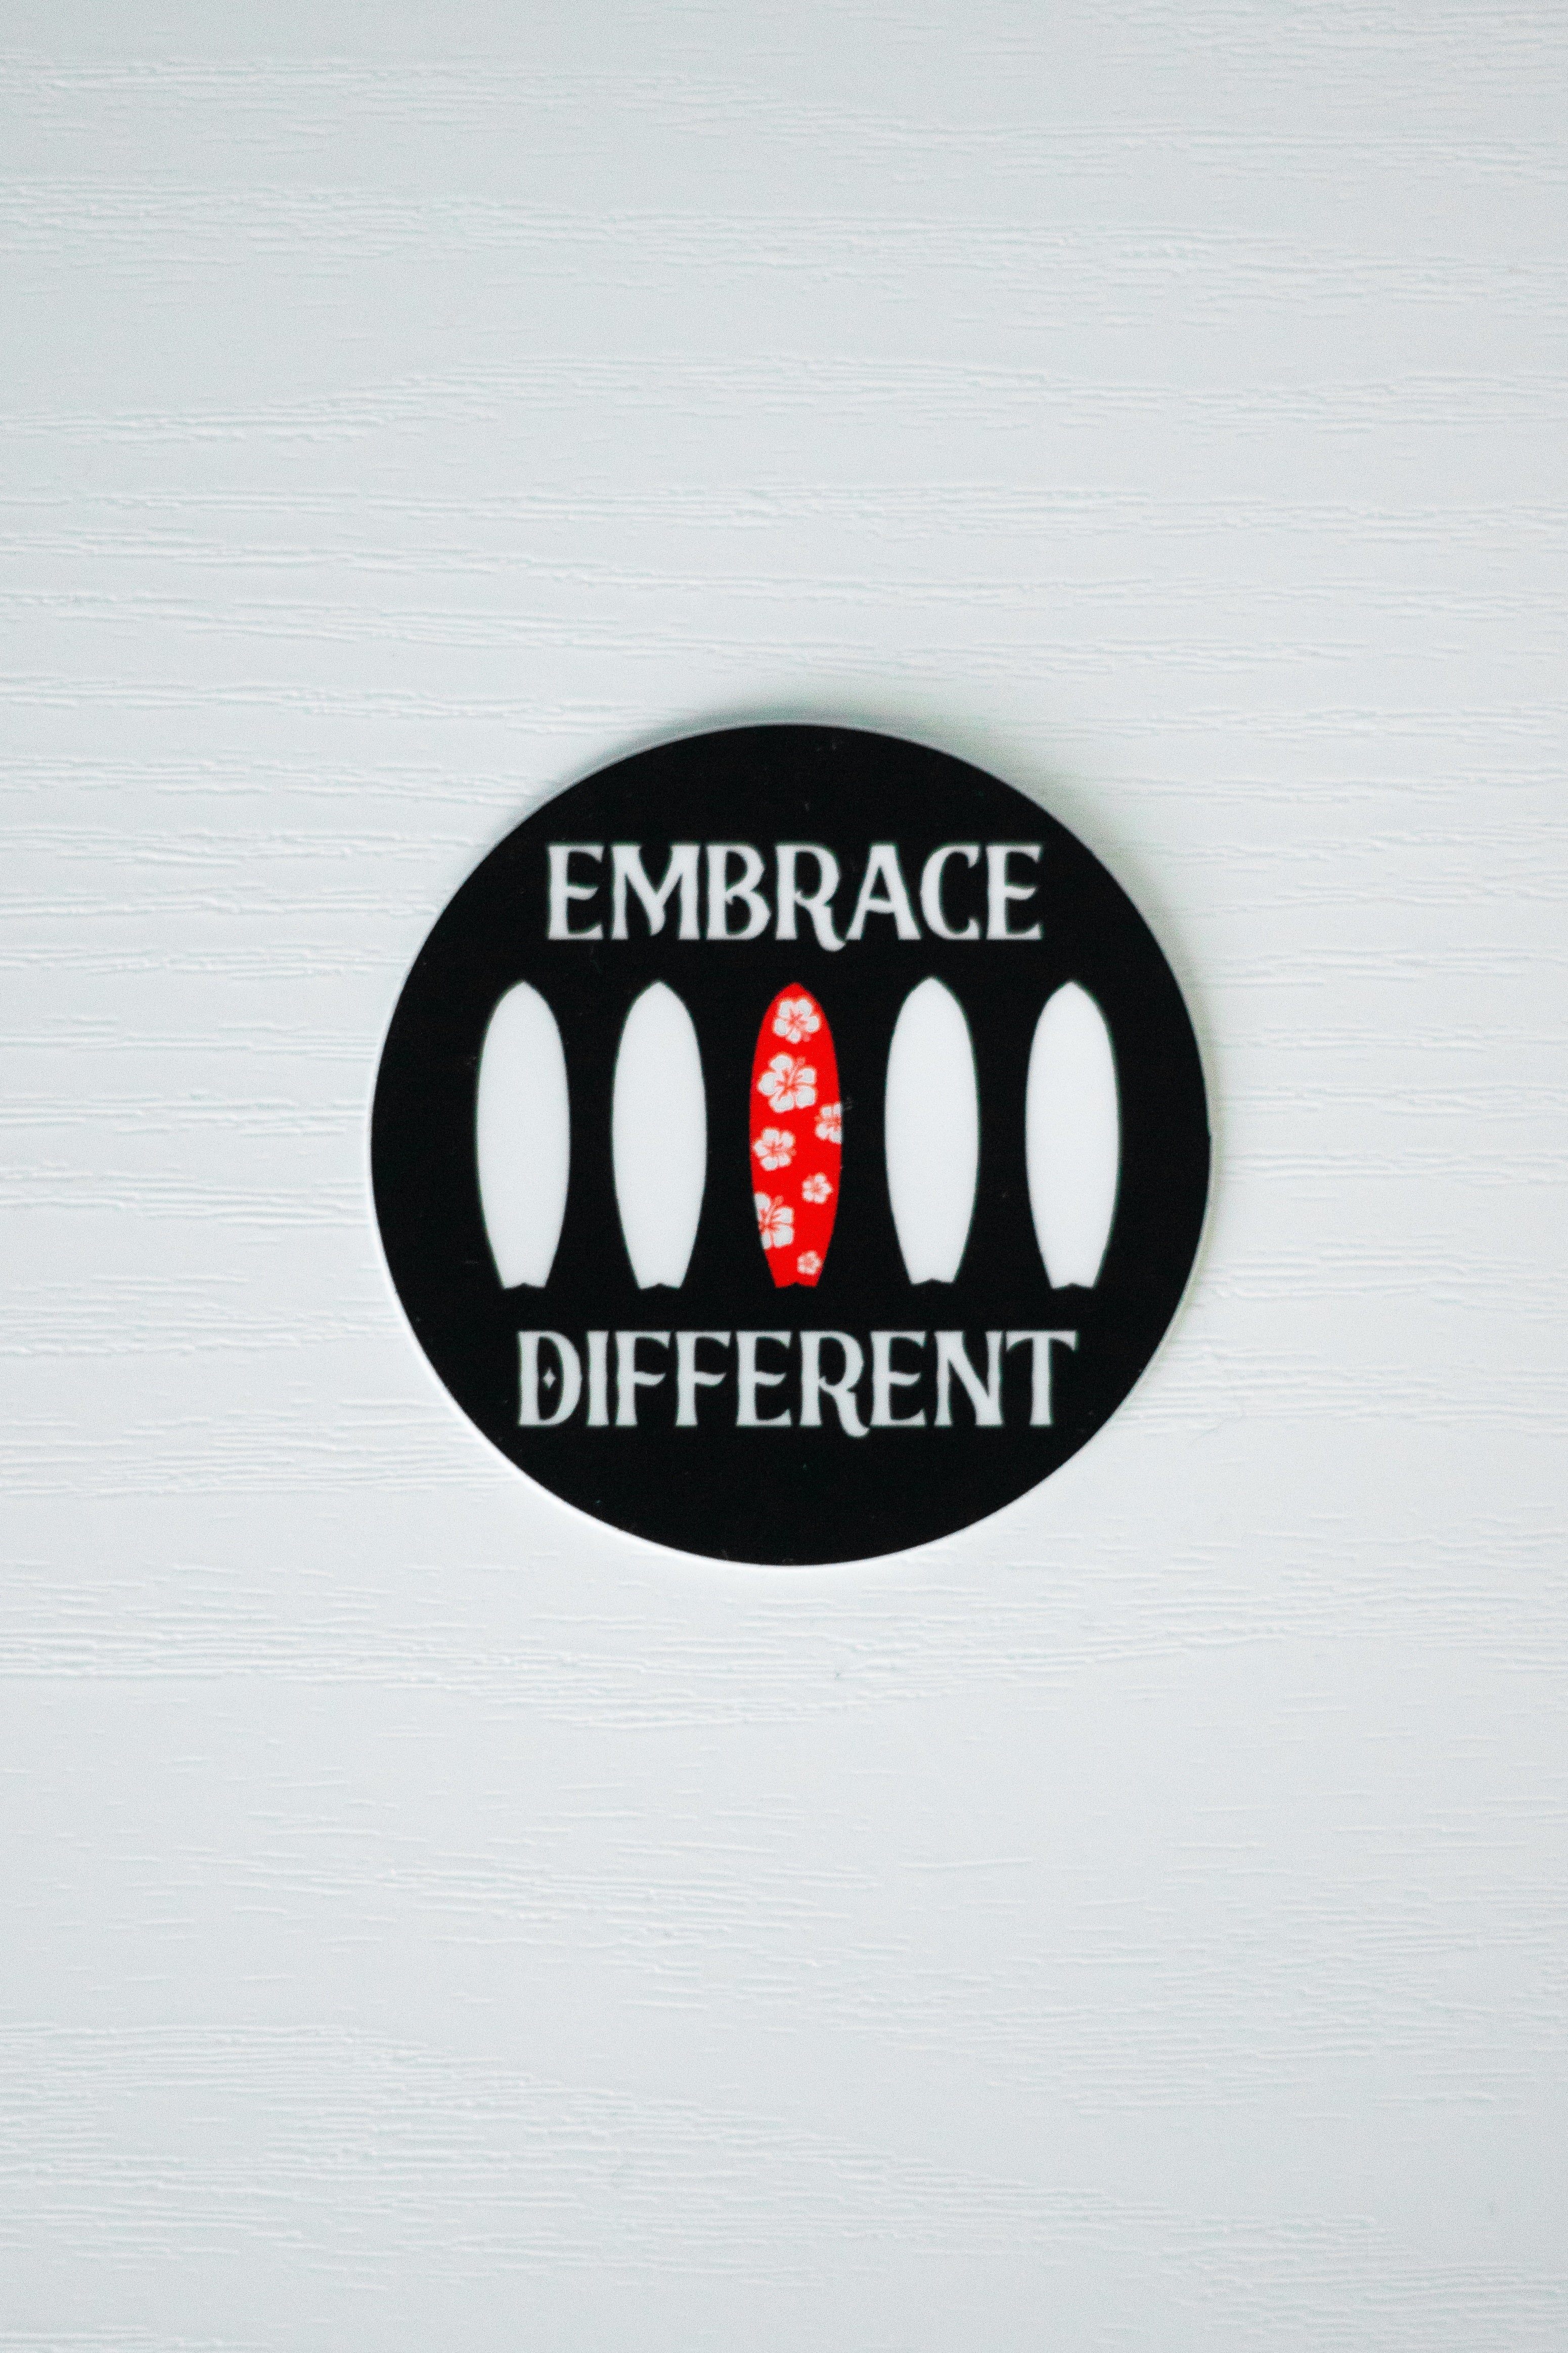 The Embrace Different Sticker